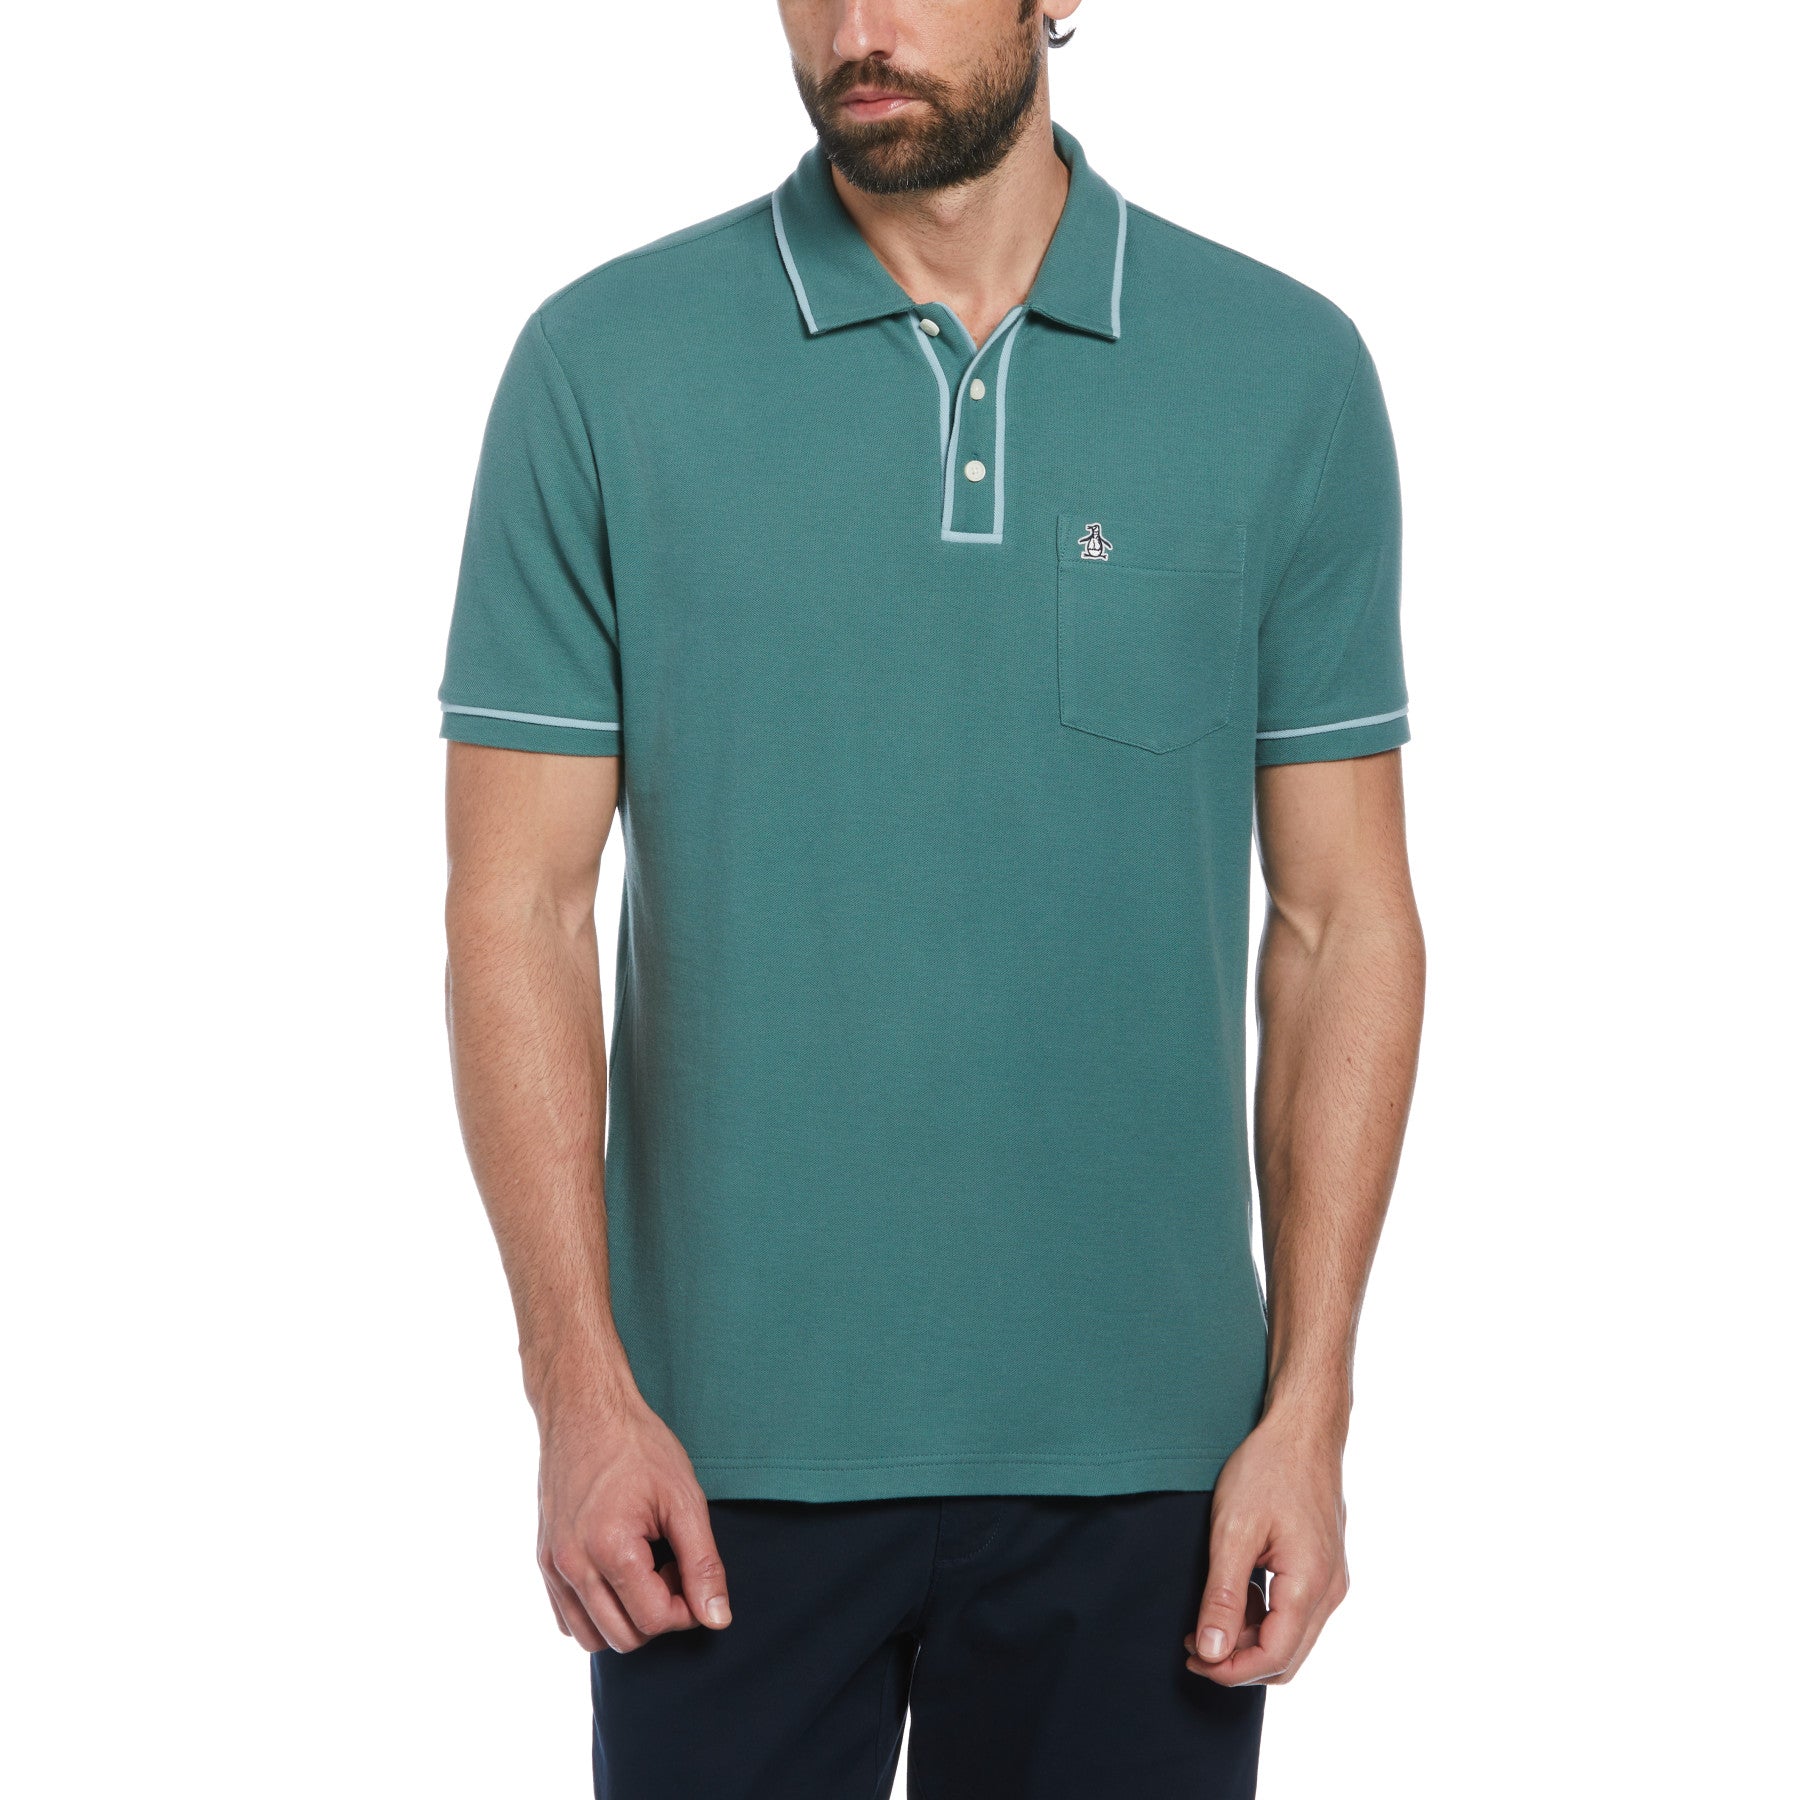 View Organic Cotton The Earl Pique Short Sleeve Polo Shirt In Sea Pine information